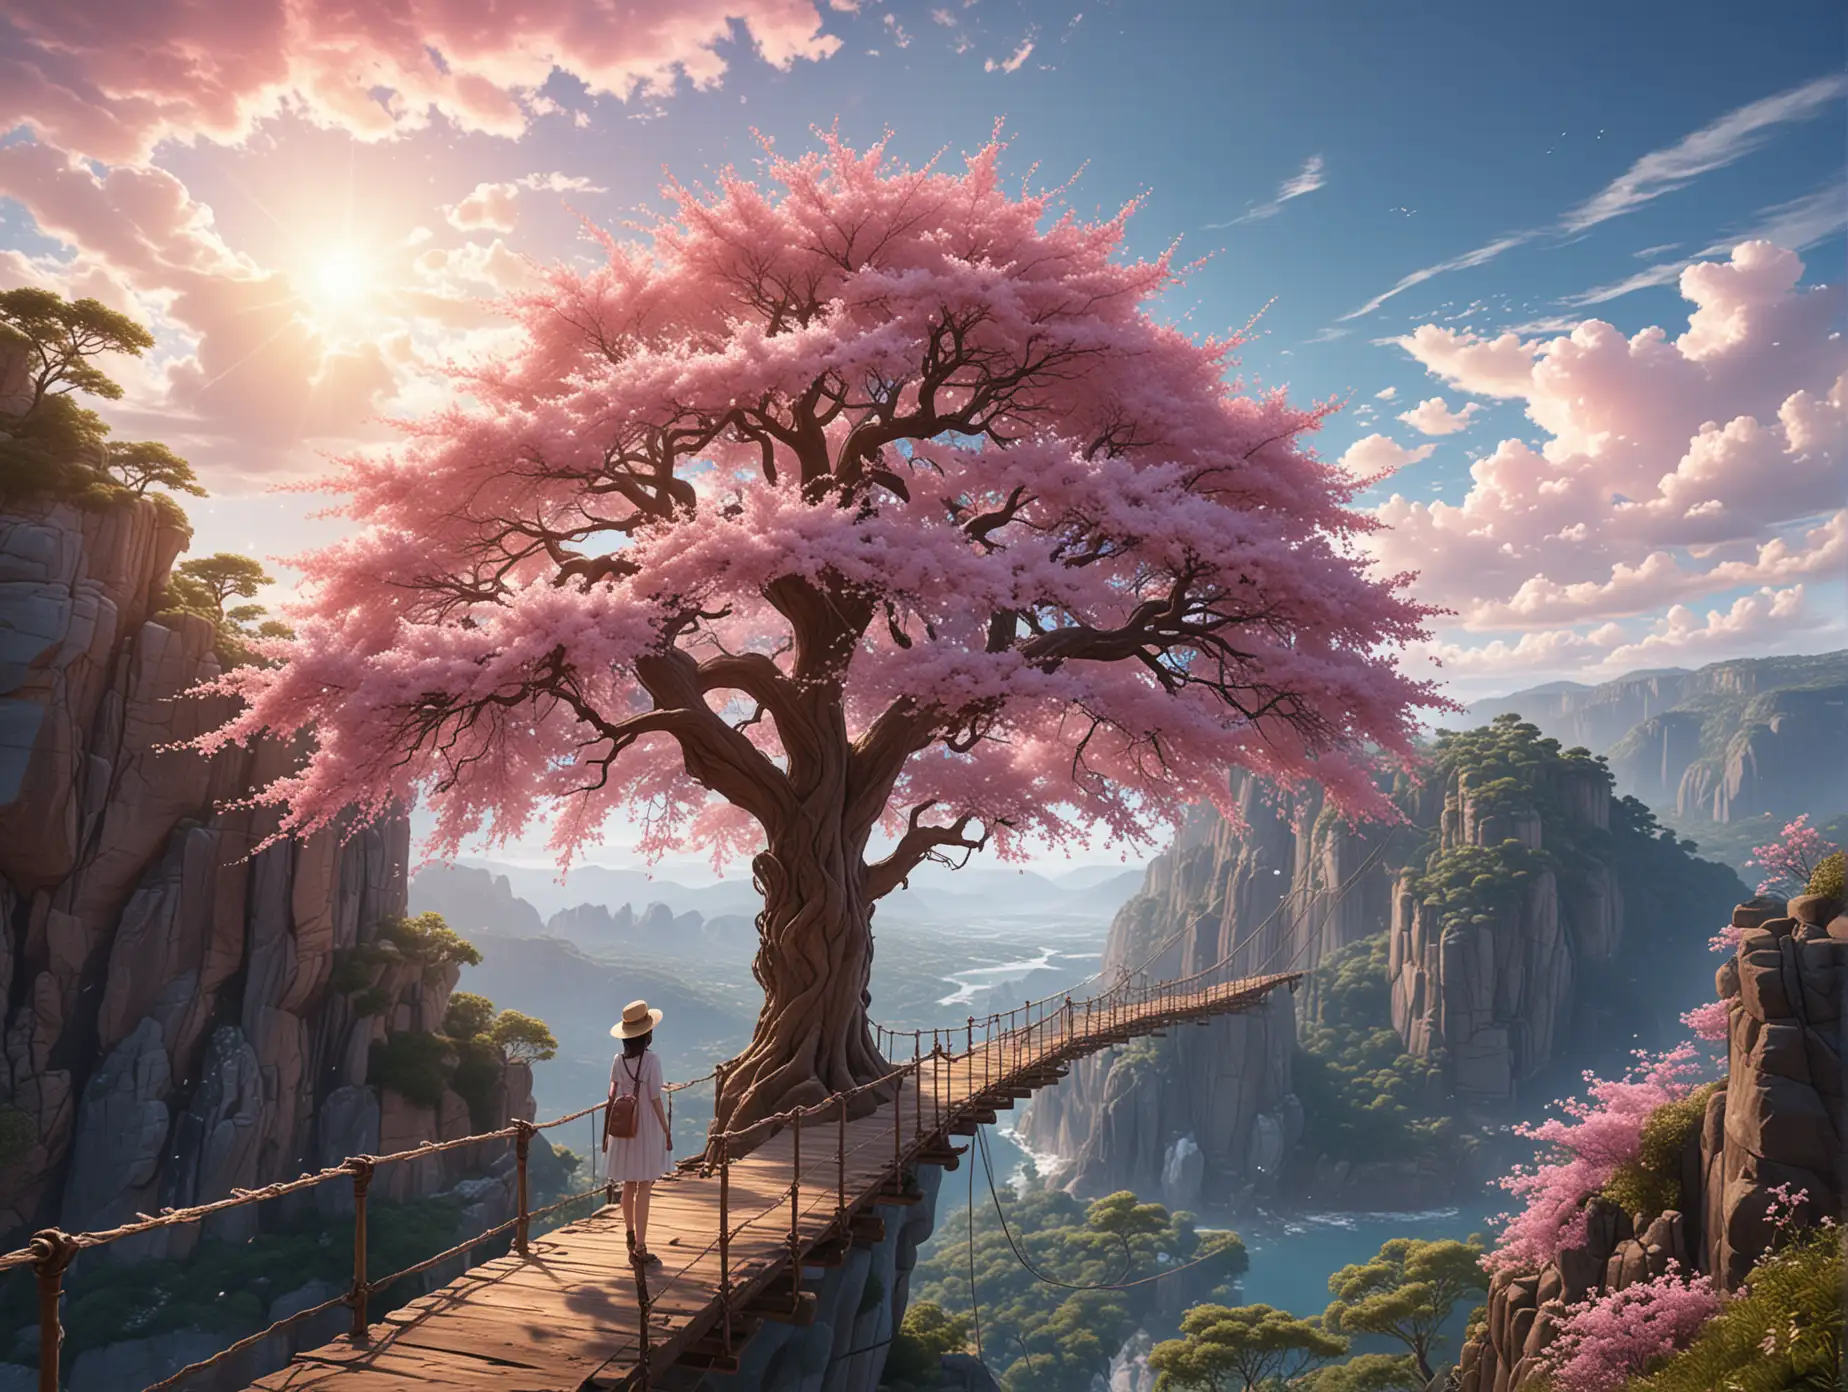 Afternoon light, A breathtaking, ultra-realistic photo capturing a colossal tree adorned with crystal blossoms, situated at the edge of a high cliff. A hanging bridge connects the two cliffs, and a girl wearing a straw hat walks bravely across it. The sky is filled with anime-style fluffy pink clouds, and the vast, blue sky stretches out in the distance. The far-angle view allows for a fully detailed and immersive experience of this awe-inspiring scene.